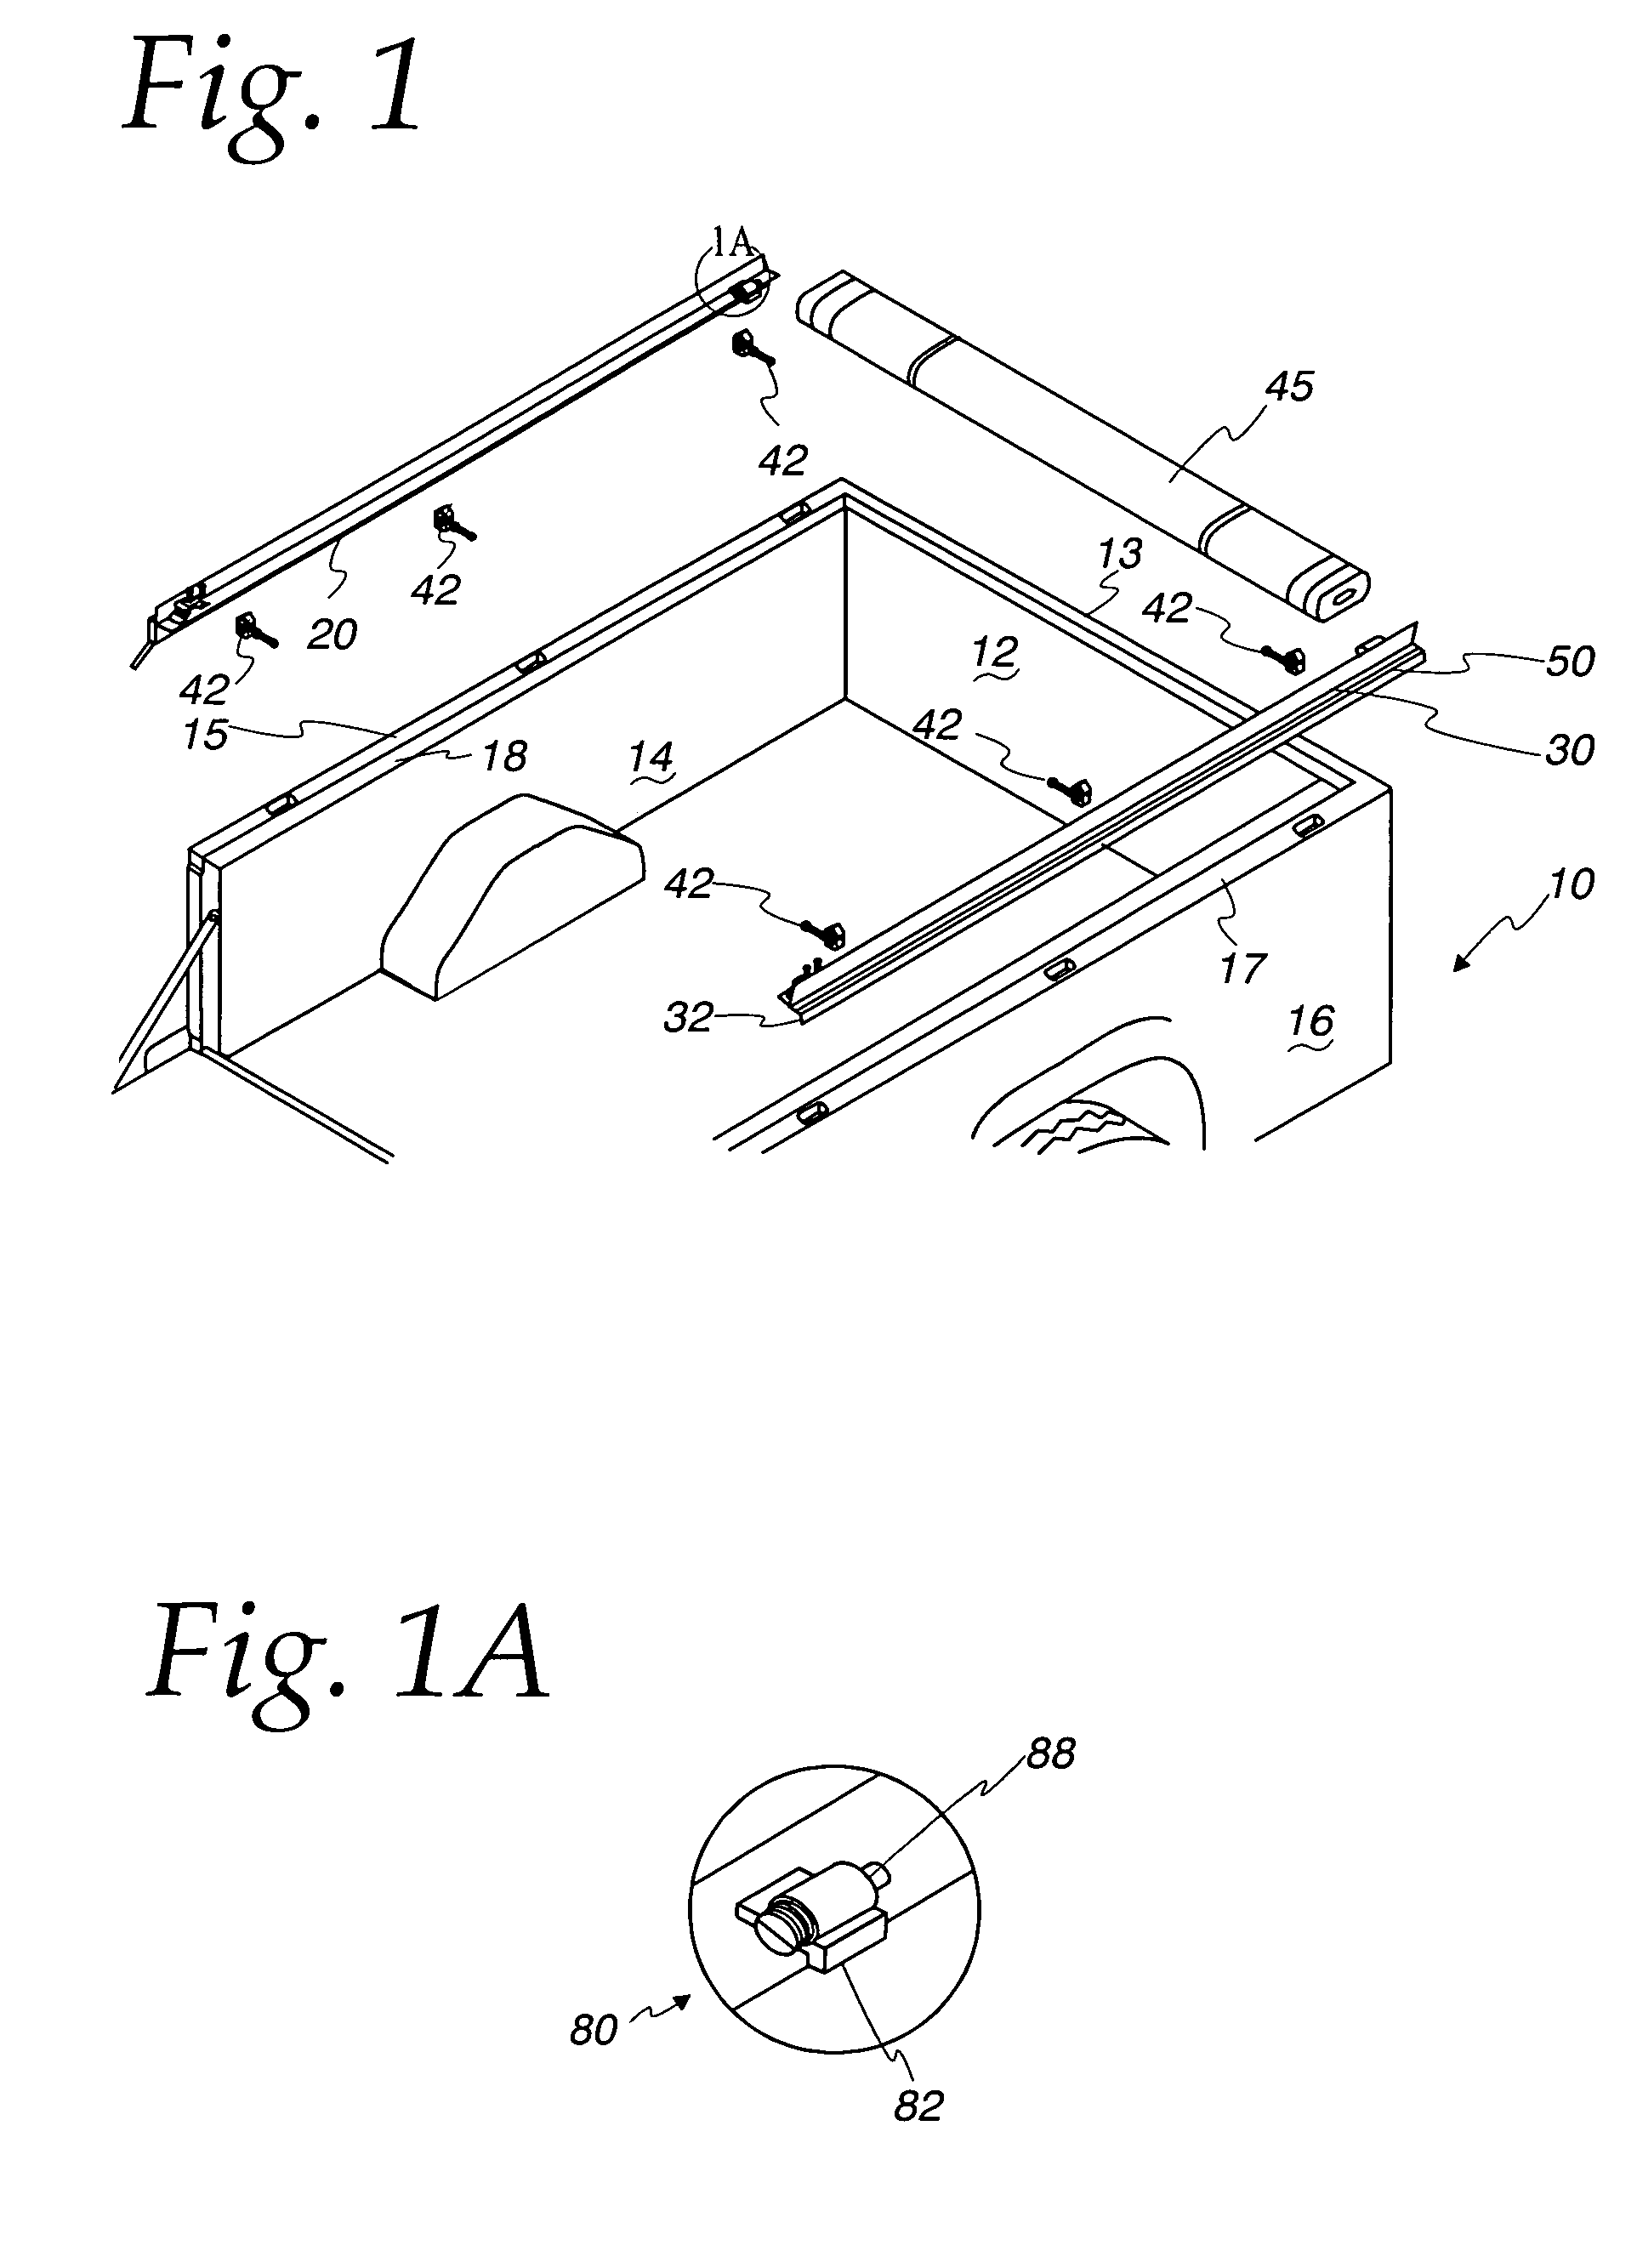 Cover system for truck box